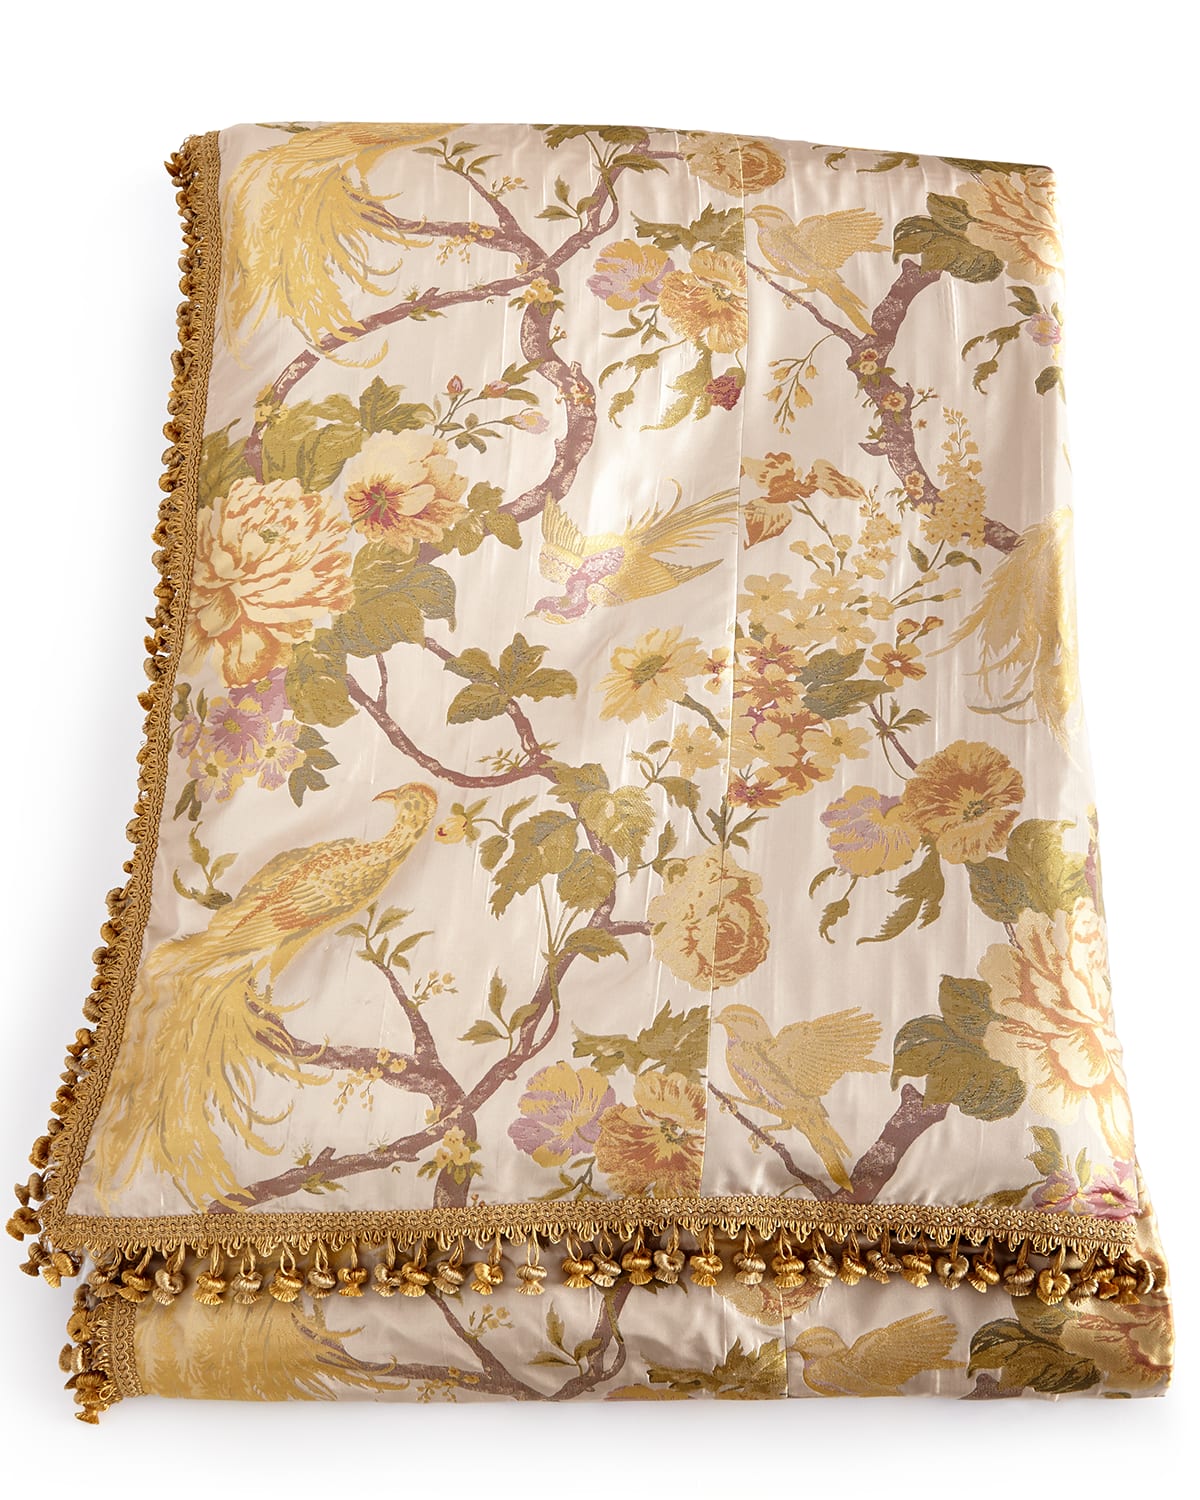 Image Sweet Dreams King Pheasant Duvet Cover with Onion Trim